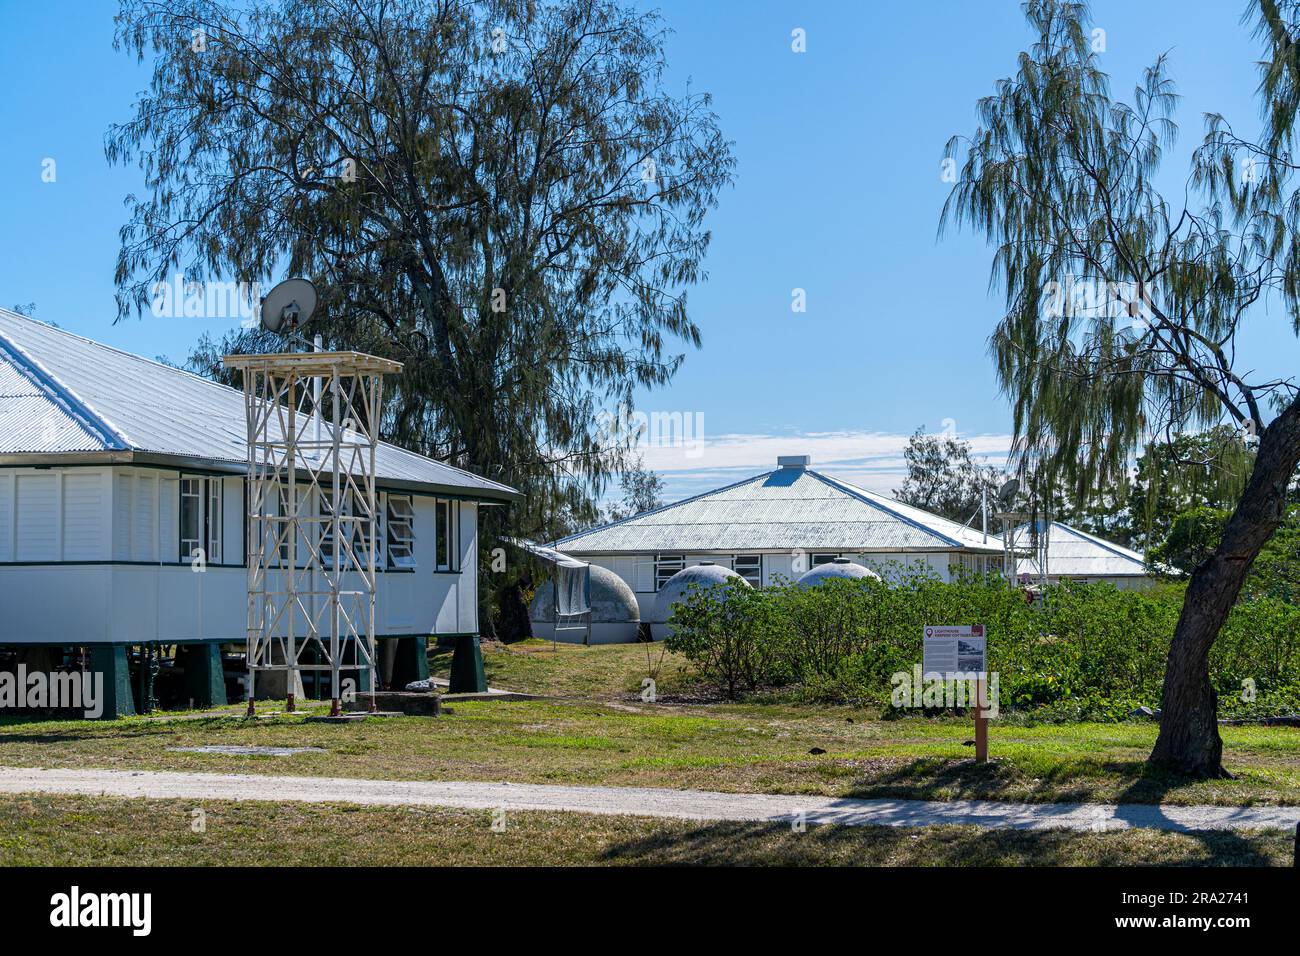 Lighthouse Keepers Cottages, Lady Elliot Island, grande Barriera Corallina, Queensland, Australia Foto Stock